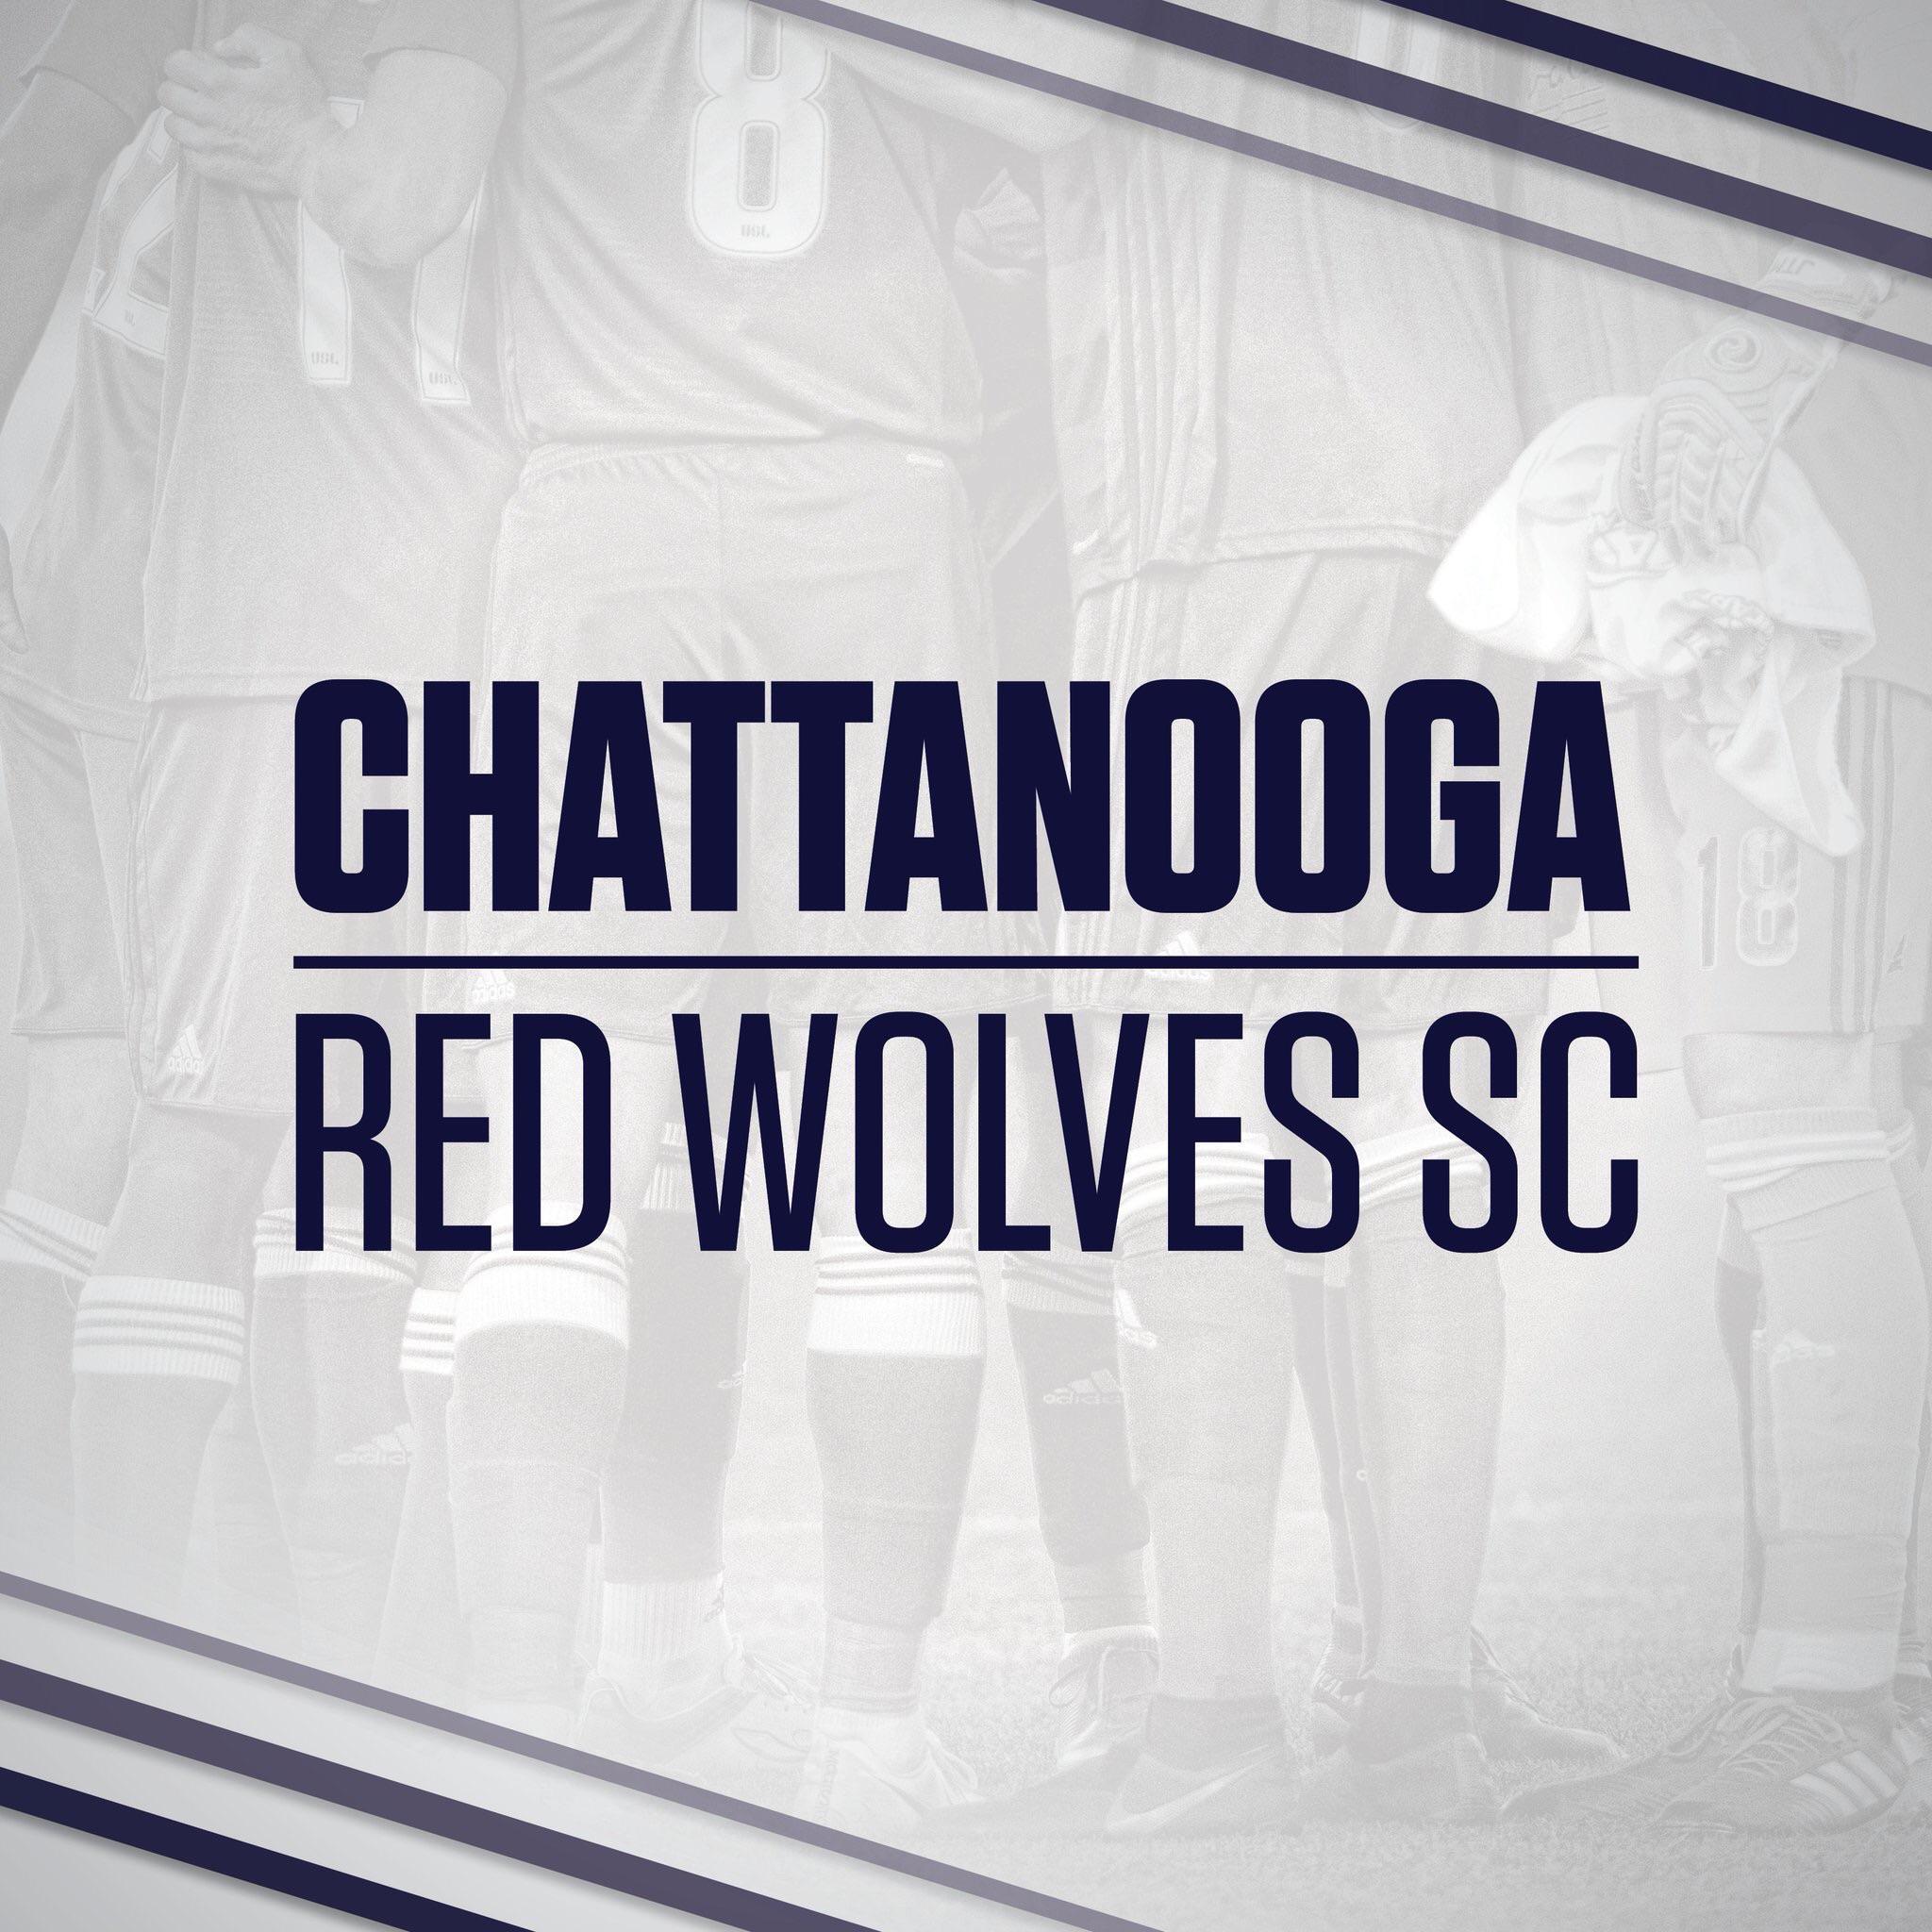 Red Wolf Soccer Logo - Chattanooga Red Wolves SC] Your official pro soccer club name is ...